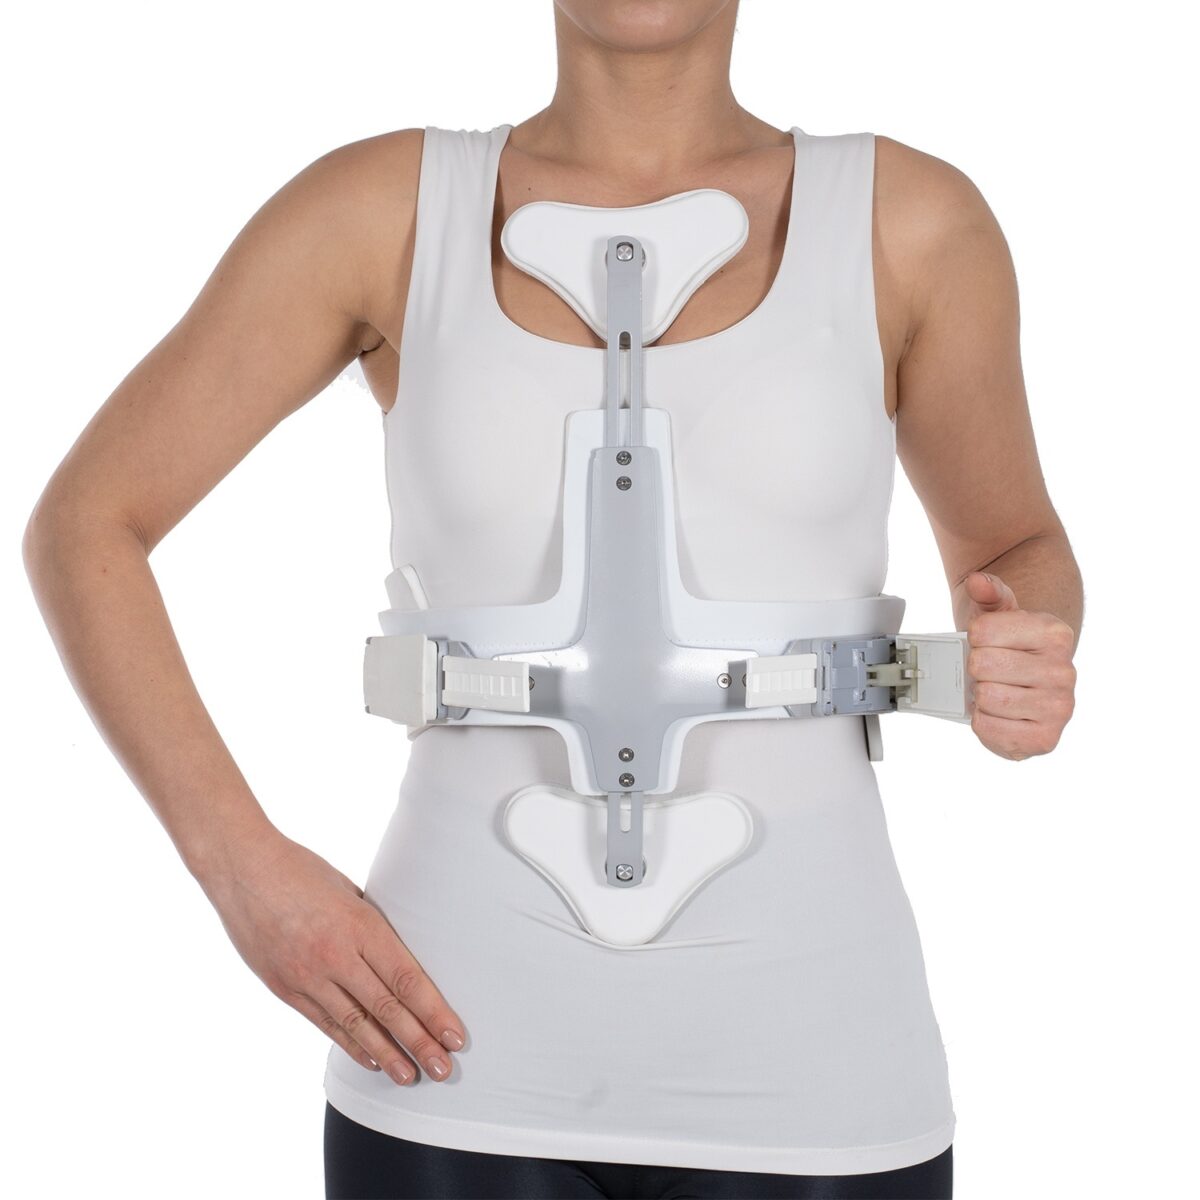 wingmed orthopedic equipments W449 hiperextension corset 3 points 71